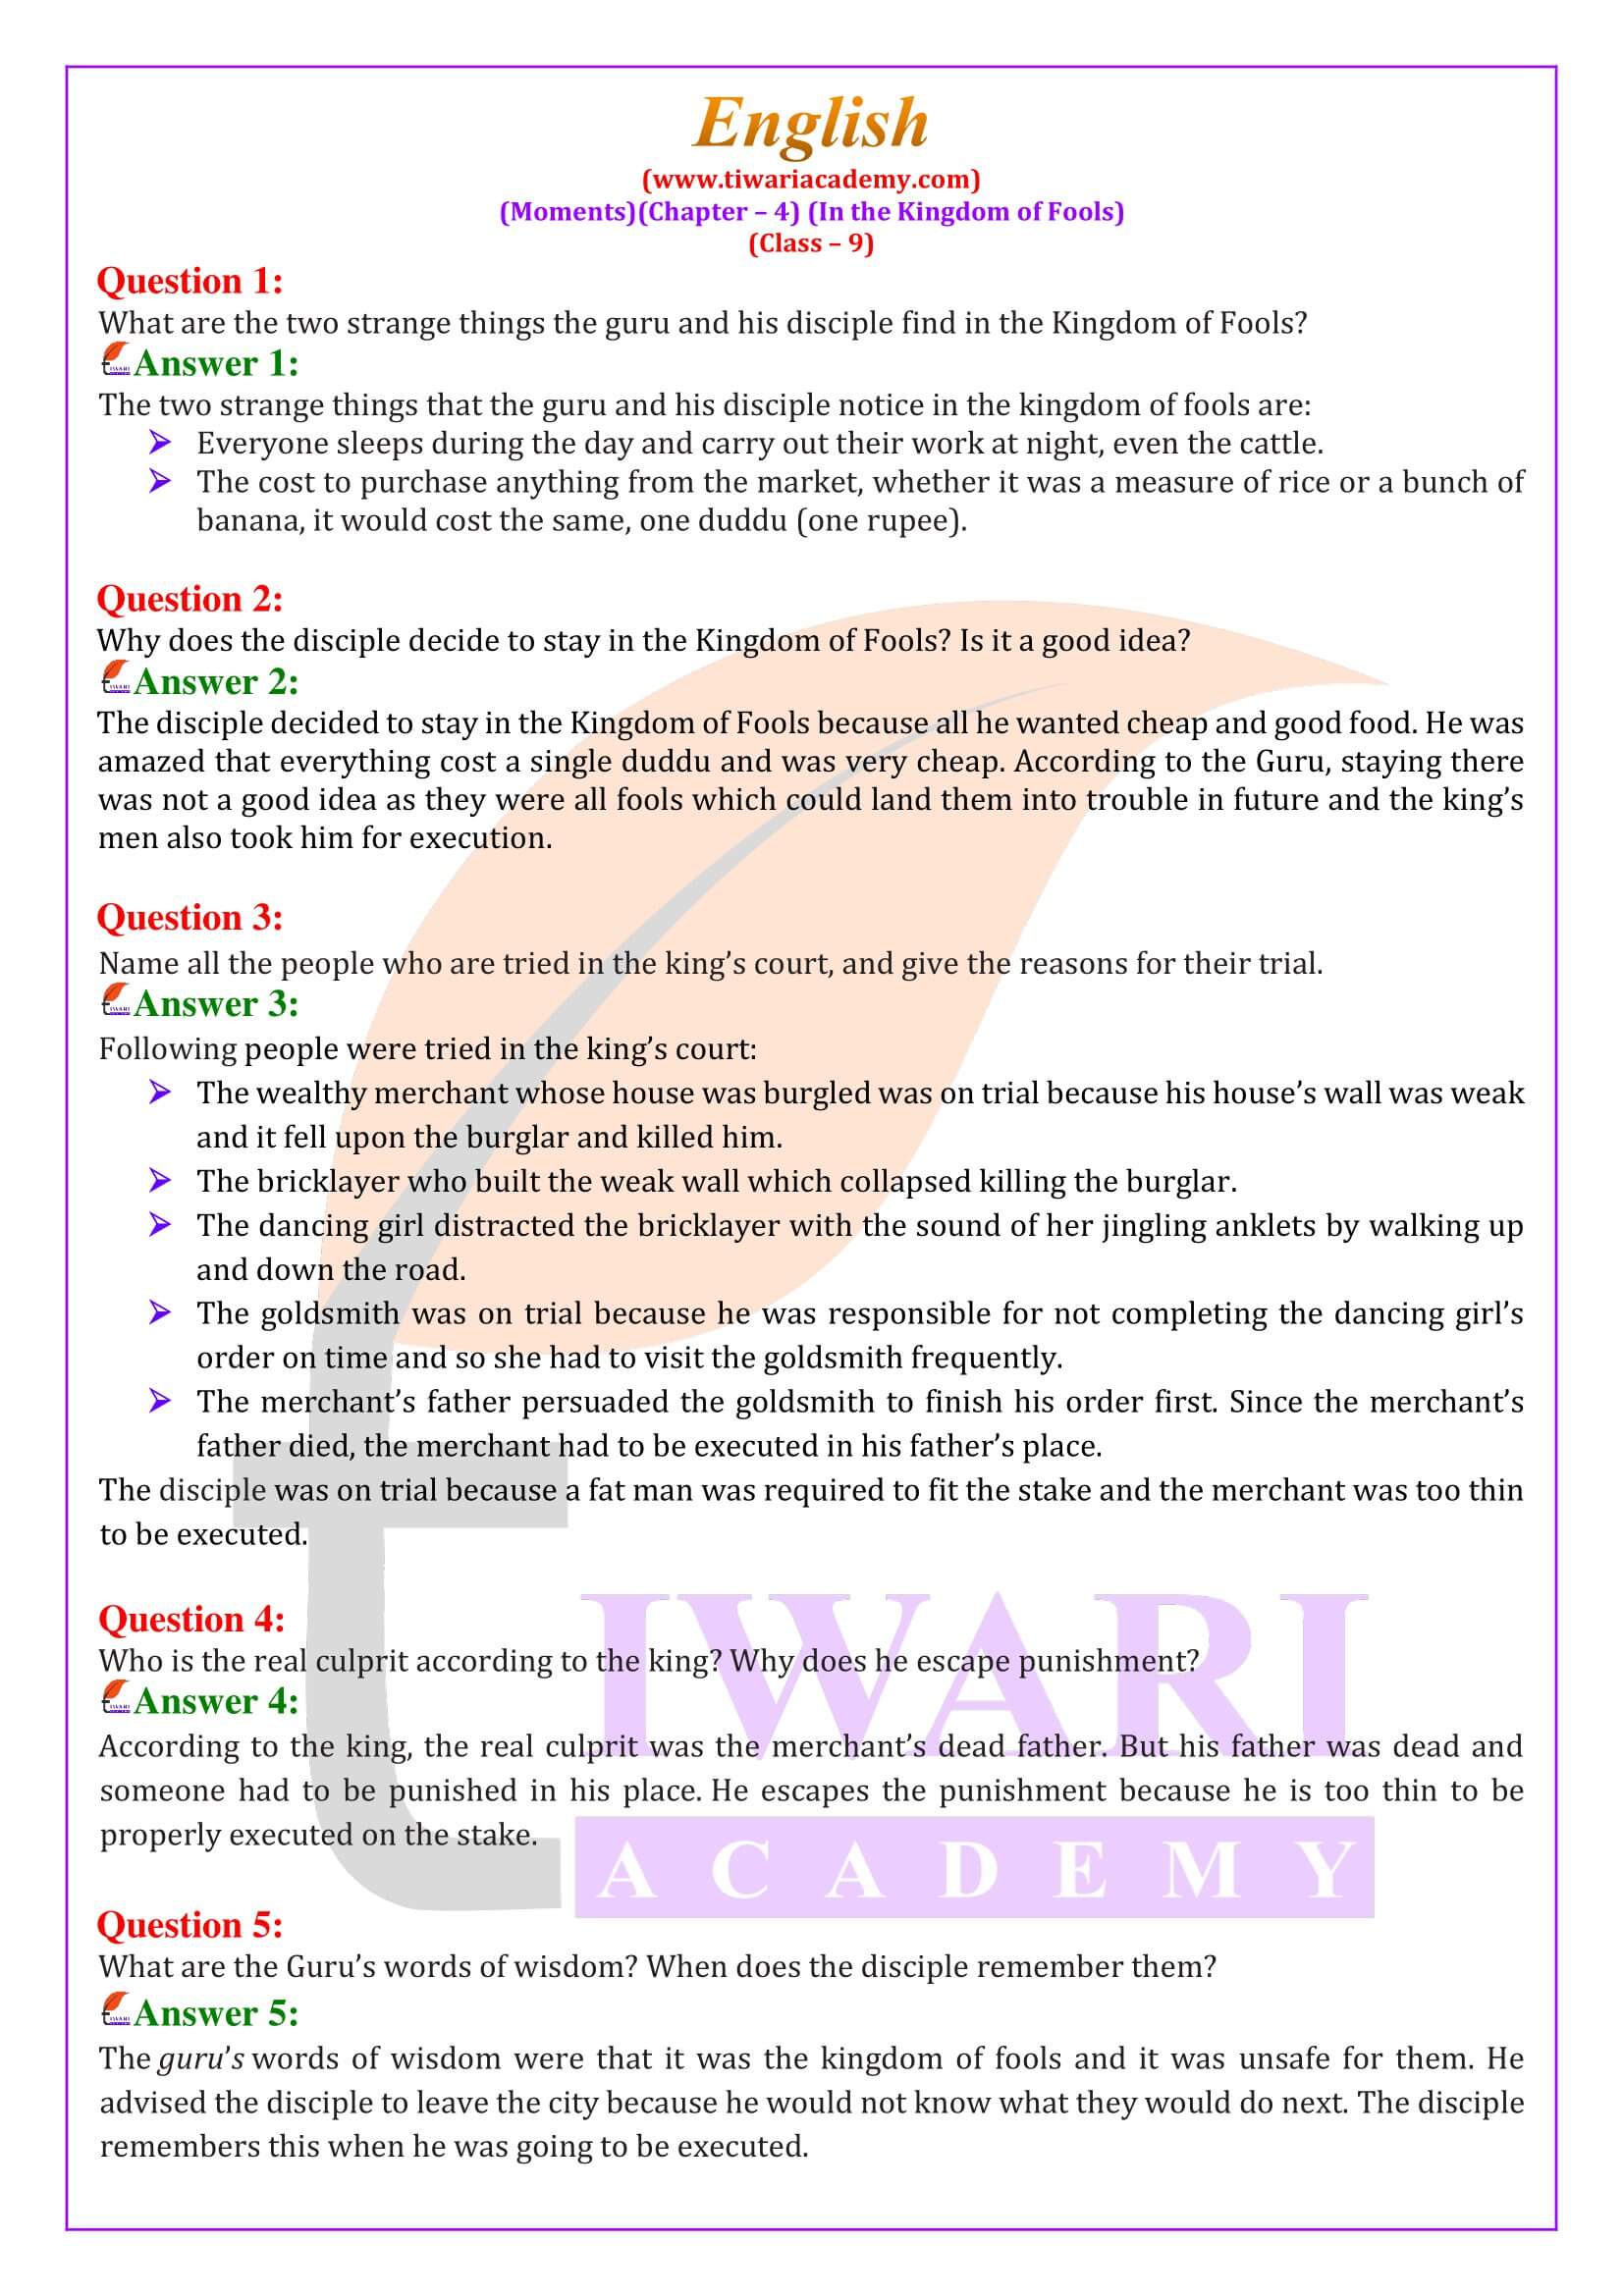 NCERT Solutions for Class 9 English Moments Chapter 4